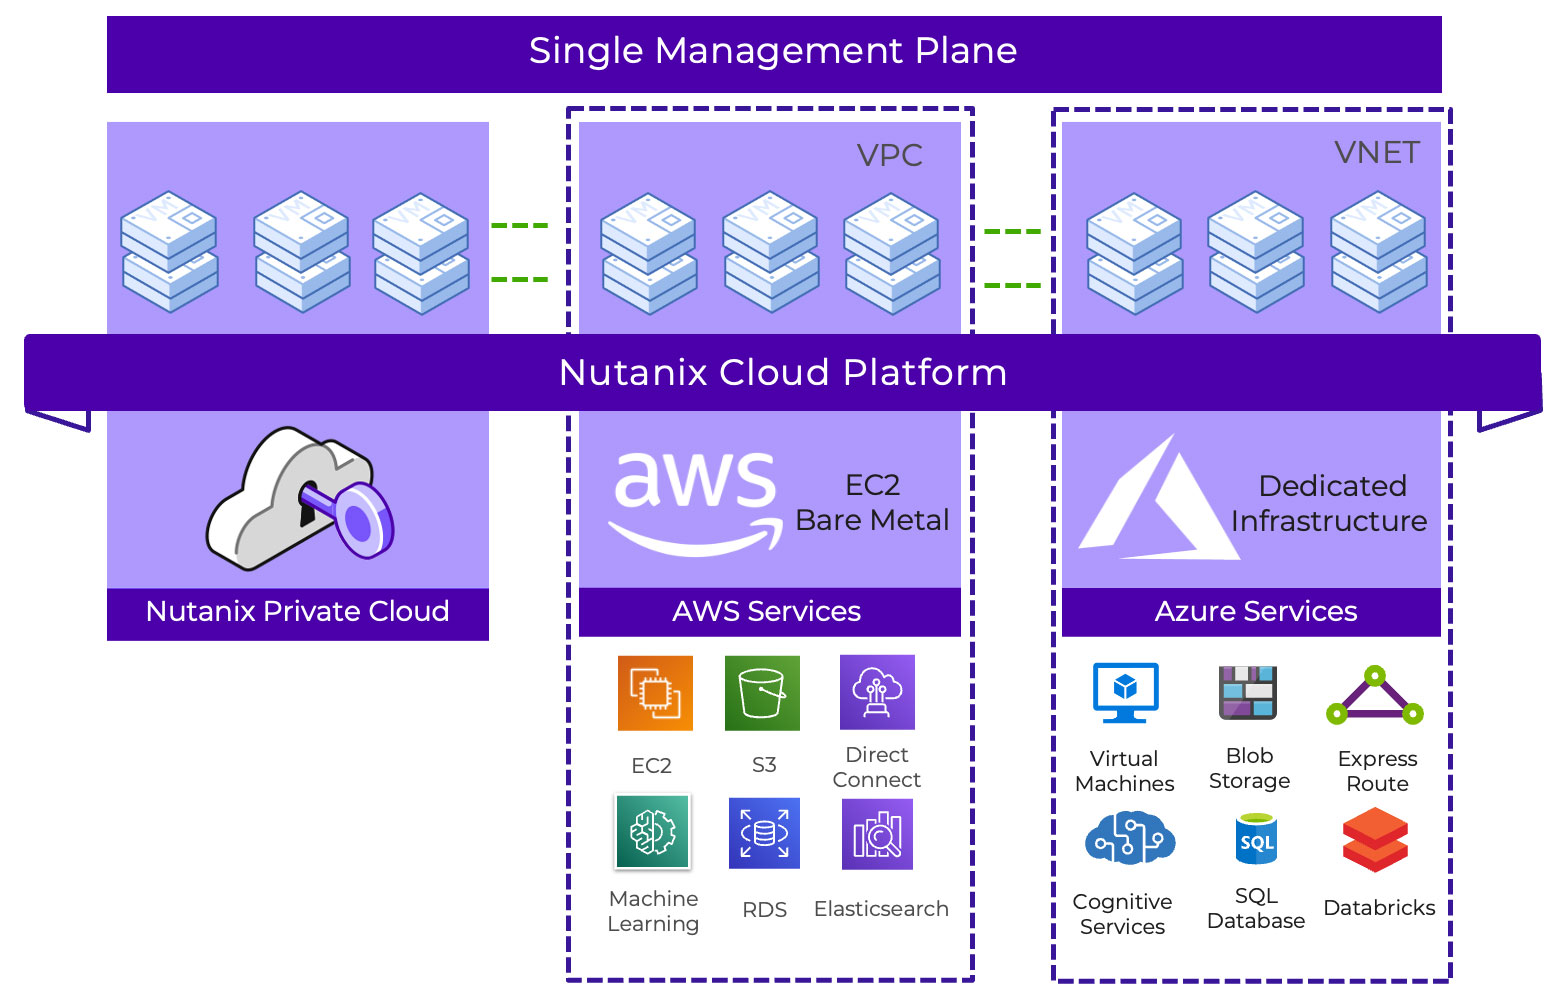 The layout of a hybrid multicloud infrastructure using the Nutanix Cloud Platform